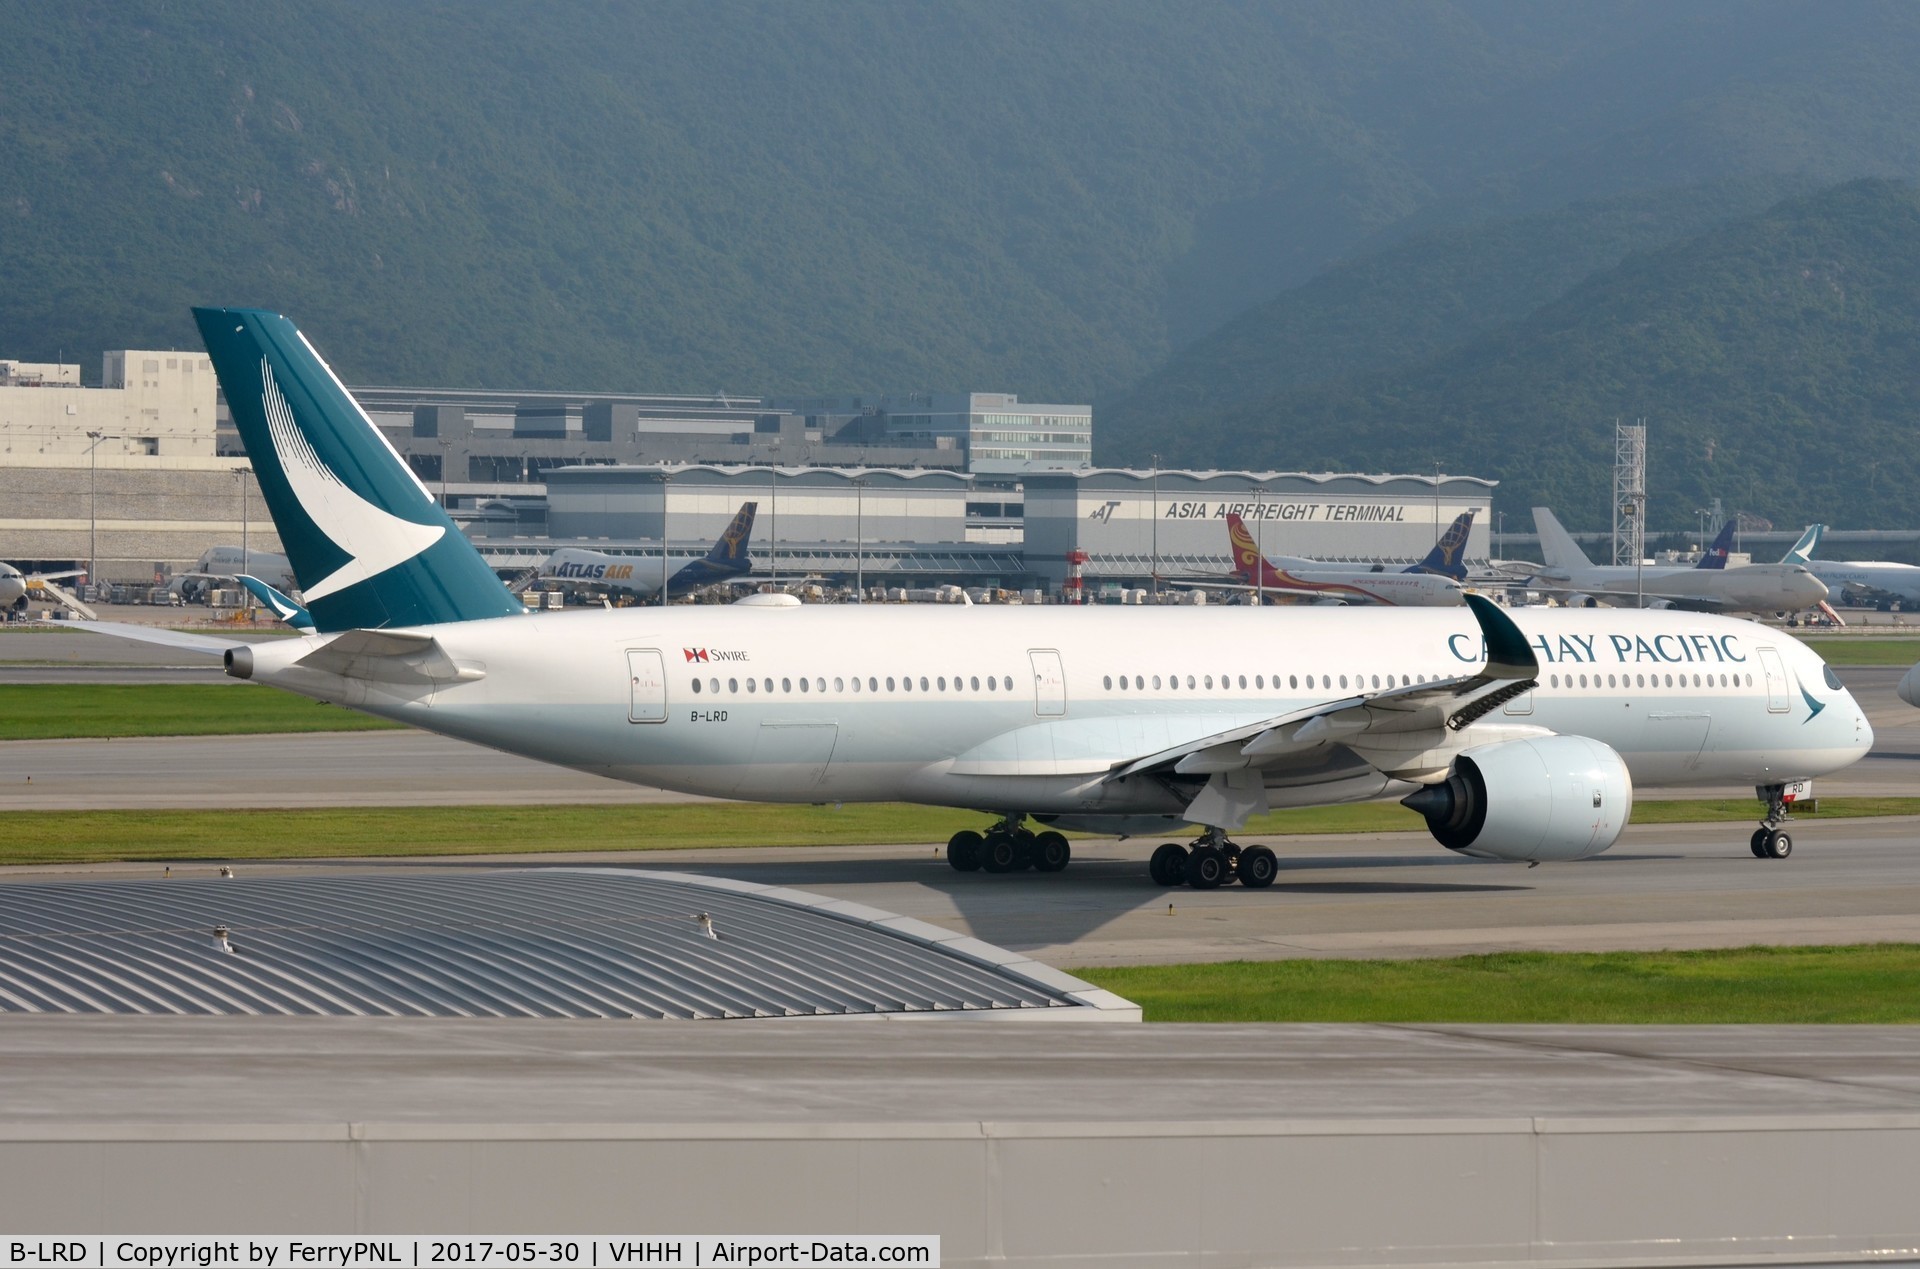 B-LRD, 2016 Airbus A350-941 C/N 038, Cathay Pacific A359 taxying past